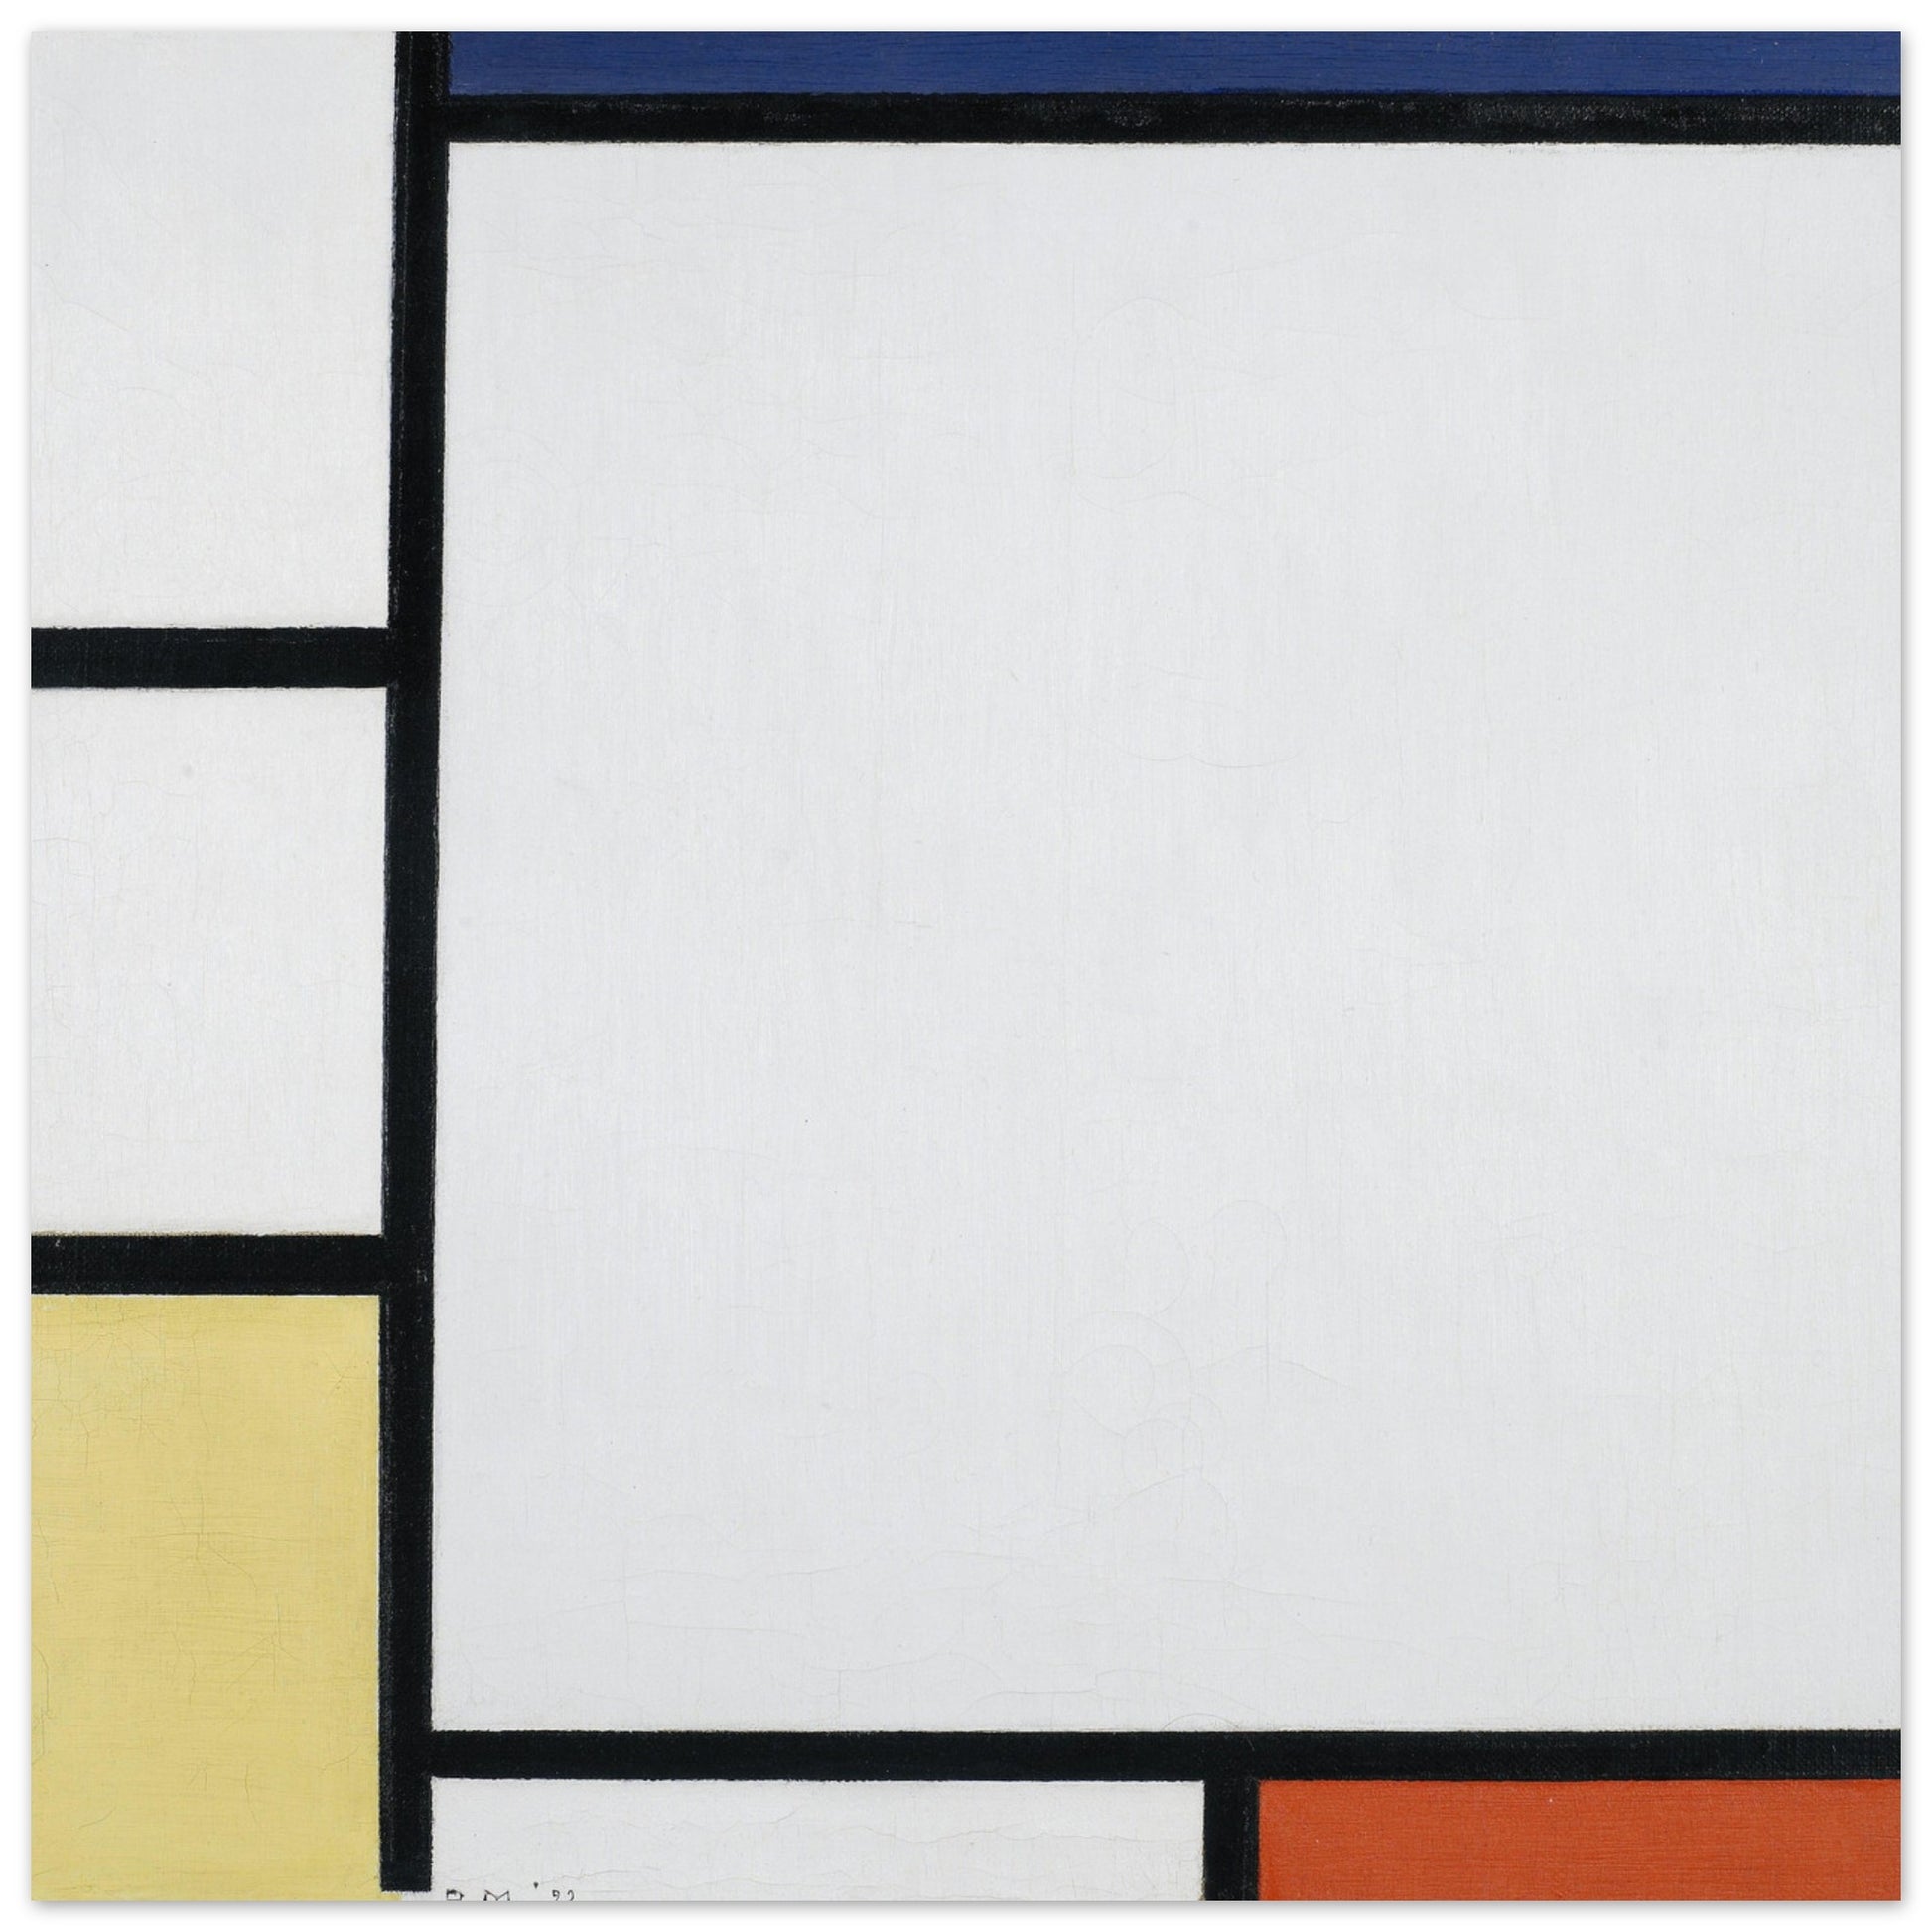 PIET MONDRIAN - COMPOSITION WITH BLUE, RED, YELLOW AND BLACK (1922) - ALUMINUM PRINT